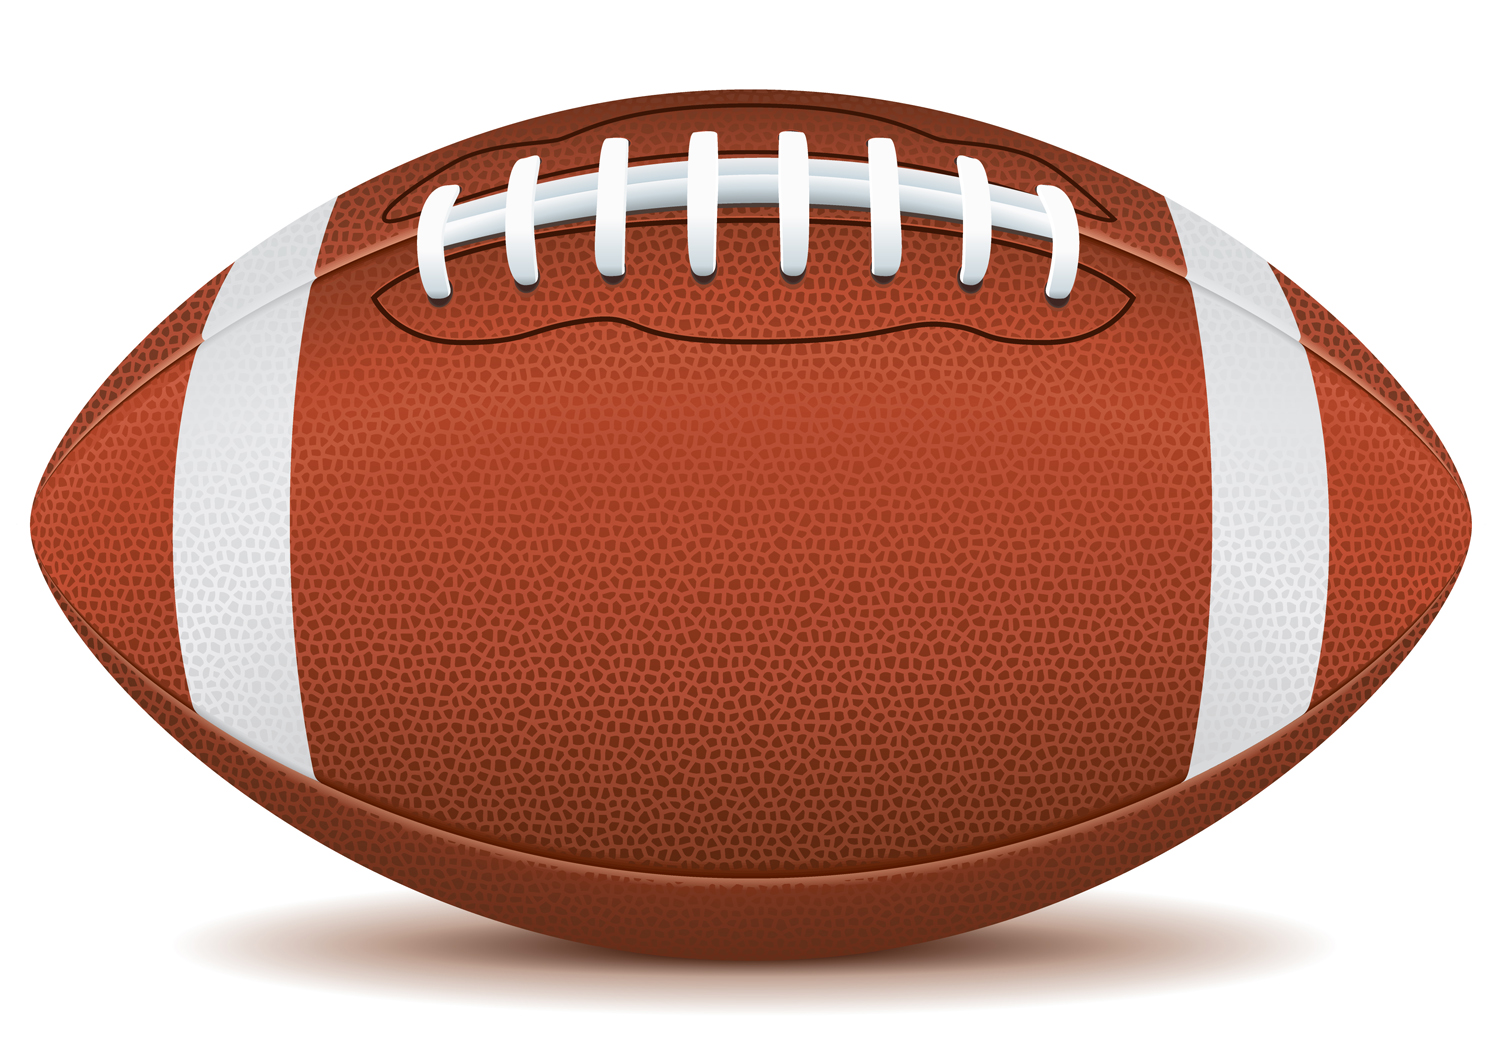 college football clipart - photo #25